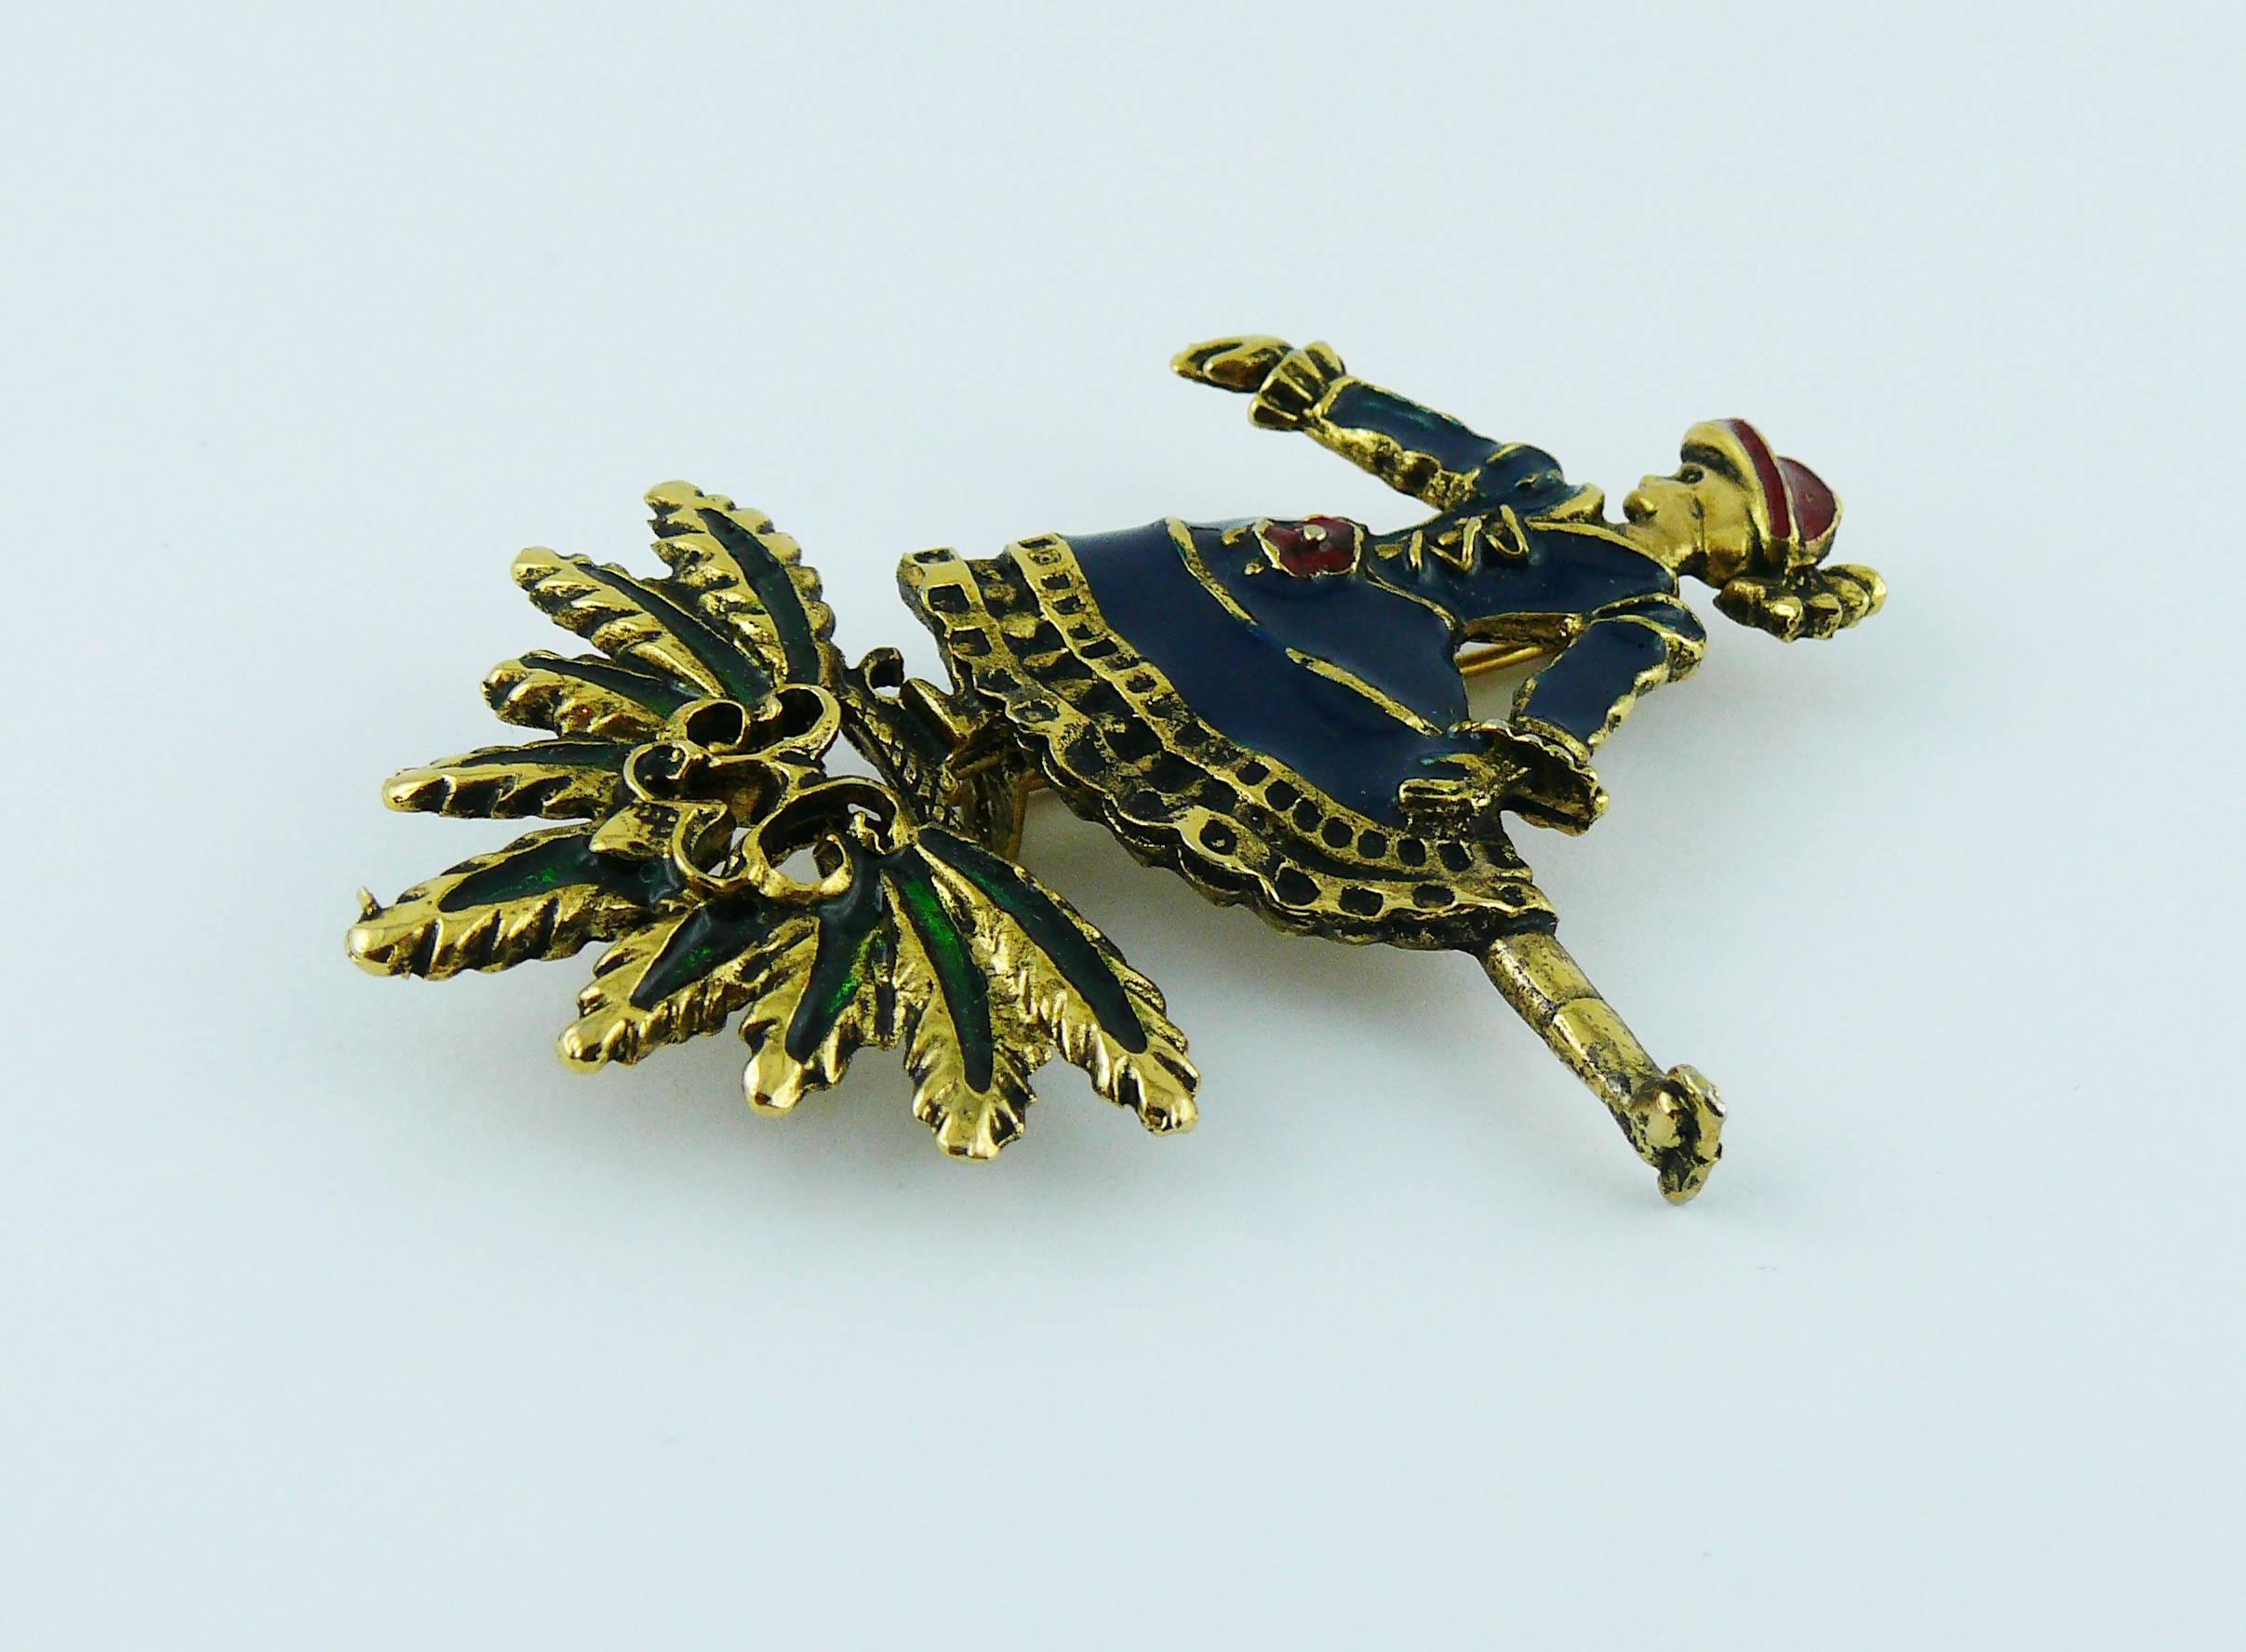 HERMES Paris gold toned with antique patina enamel ice skater brooch.

Embossed HERMES Parfums.

Indicative measurements : height approx. 6.3 cm (2.48 inches) / max. width approx. 3.7 cm (1.46 inches).

JEWELRY CONDITION CHART
- New or never worn :